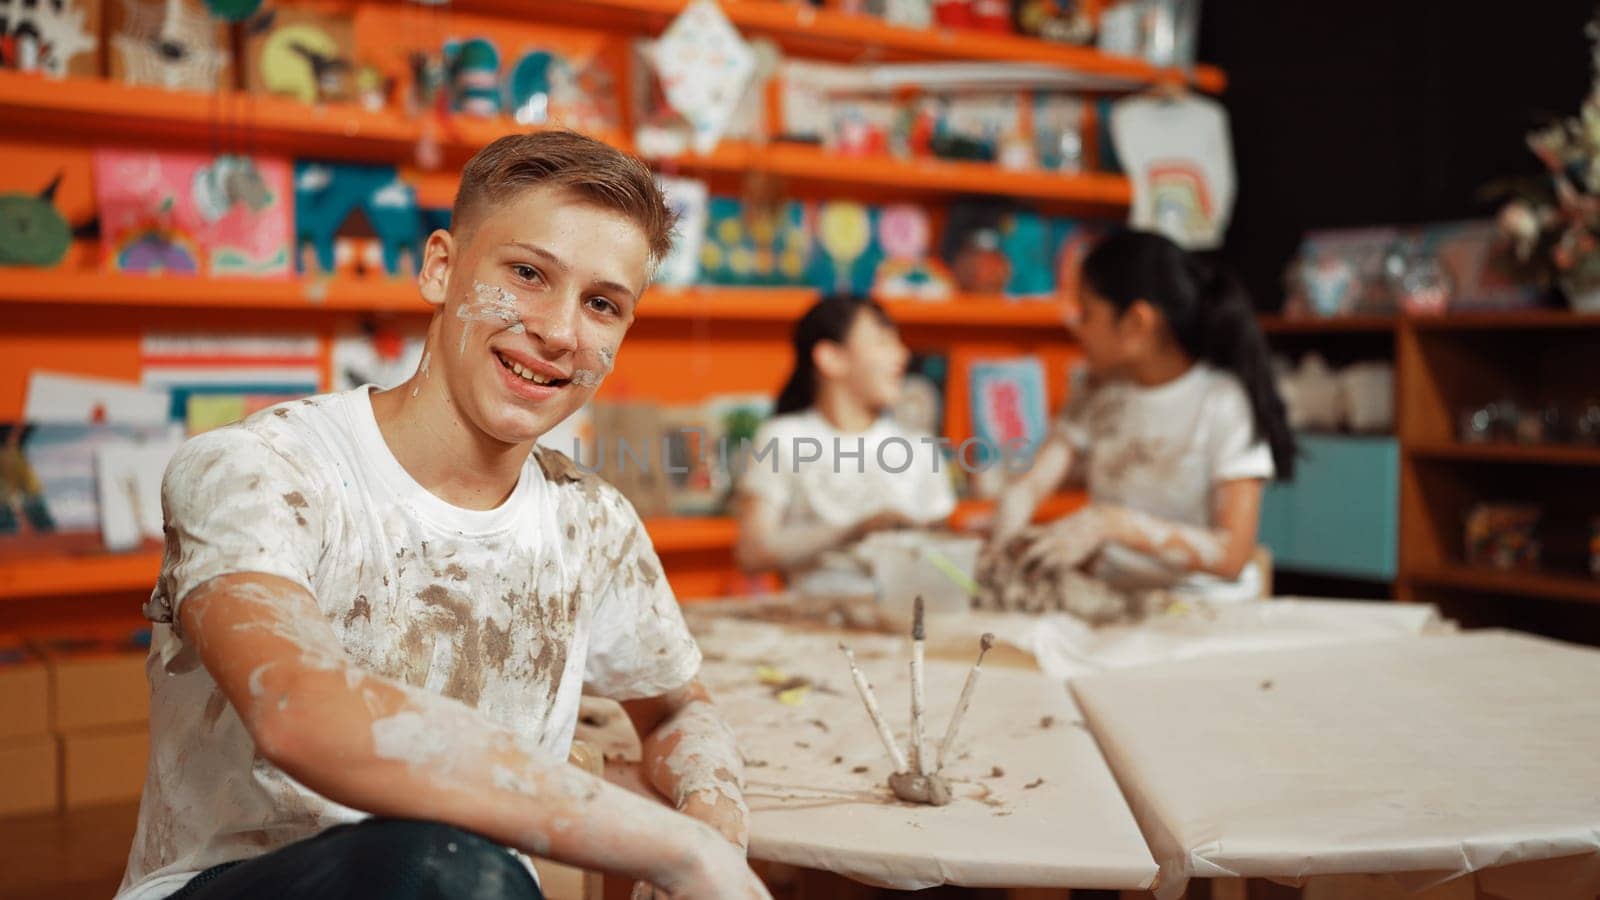 Highschool boy looking at camera while children modeling clay. Edification. by biancoblue